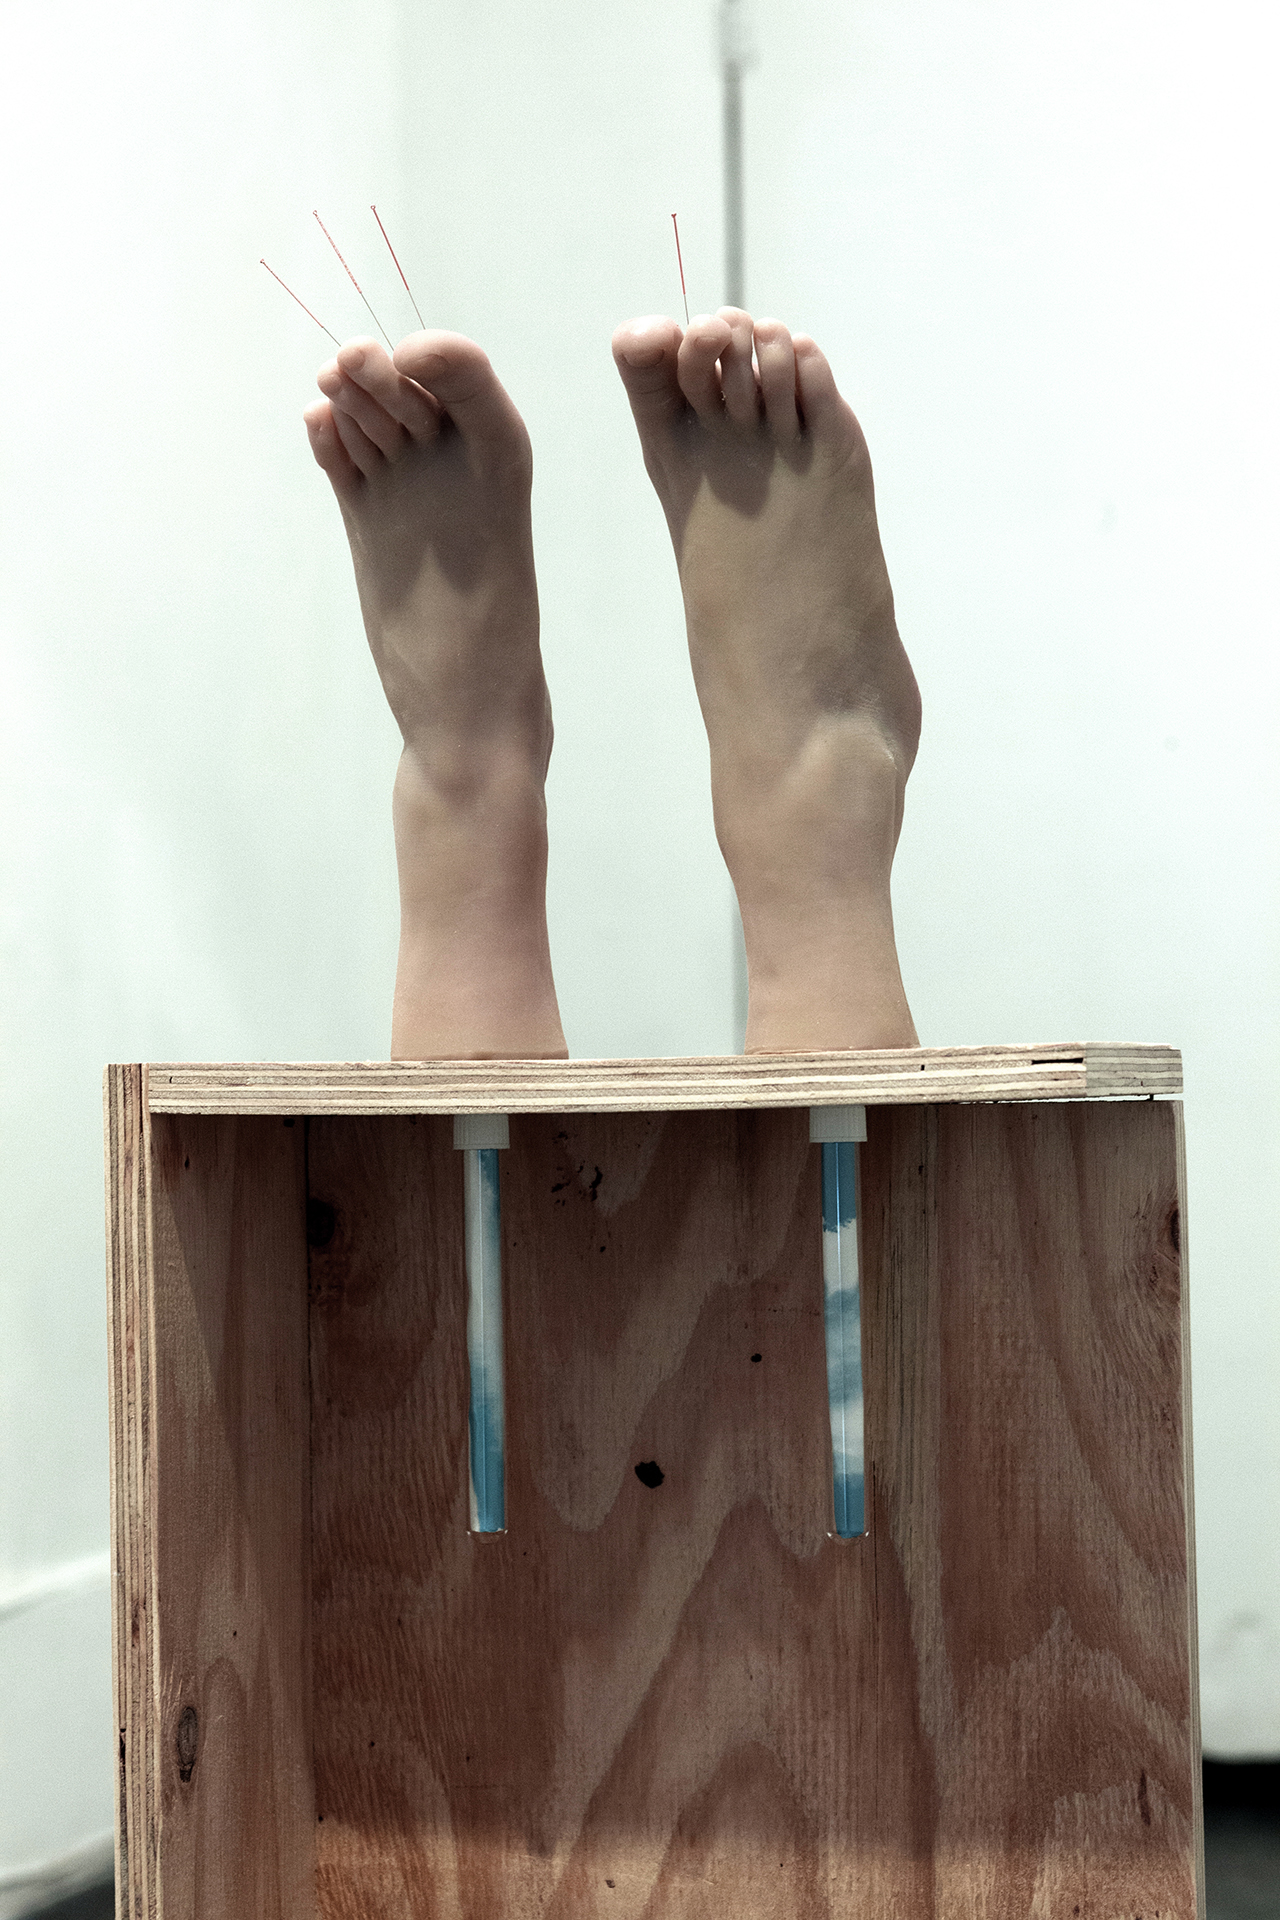 Maryam Jafri. Anxiety (2017). 12.5"x 6.75" x 40.5". wood, silicone feet, acupuncture needles, test tubes, paper. Detail